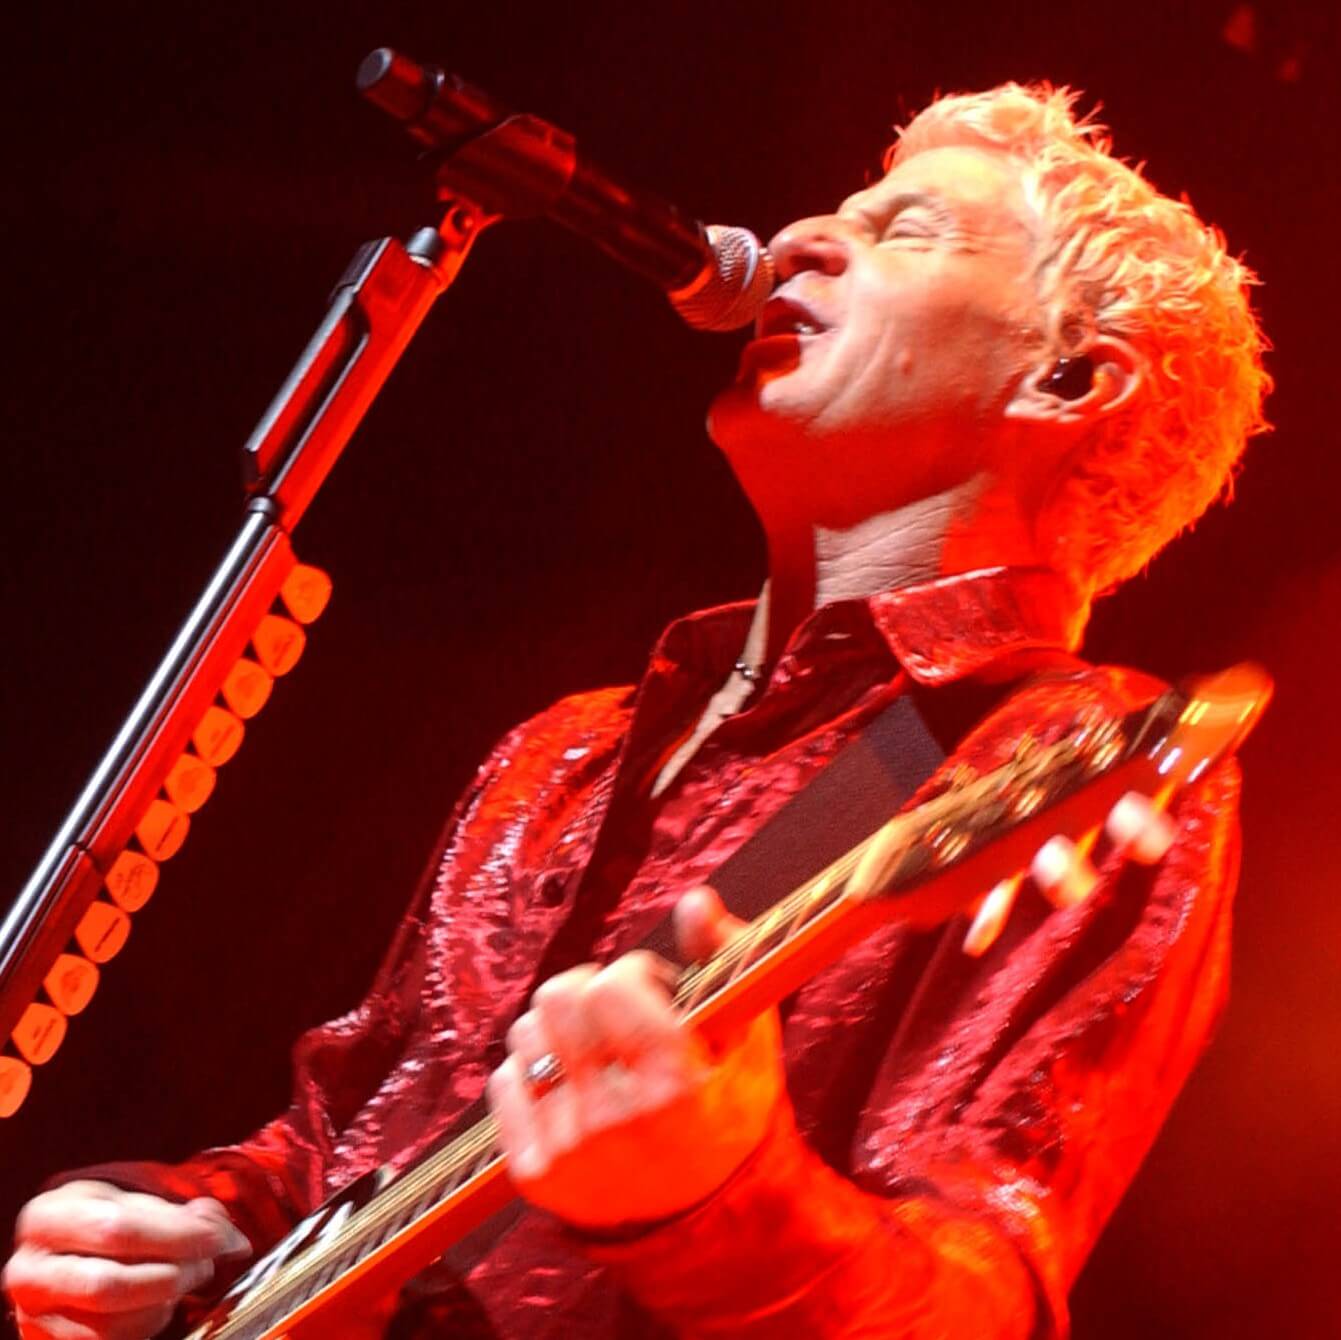 REO Speedwagon's Kevin Cronin with red light